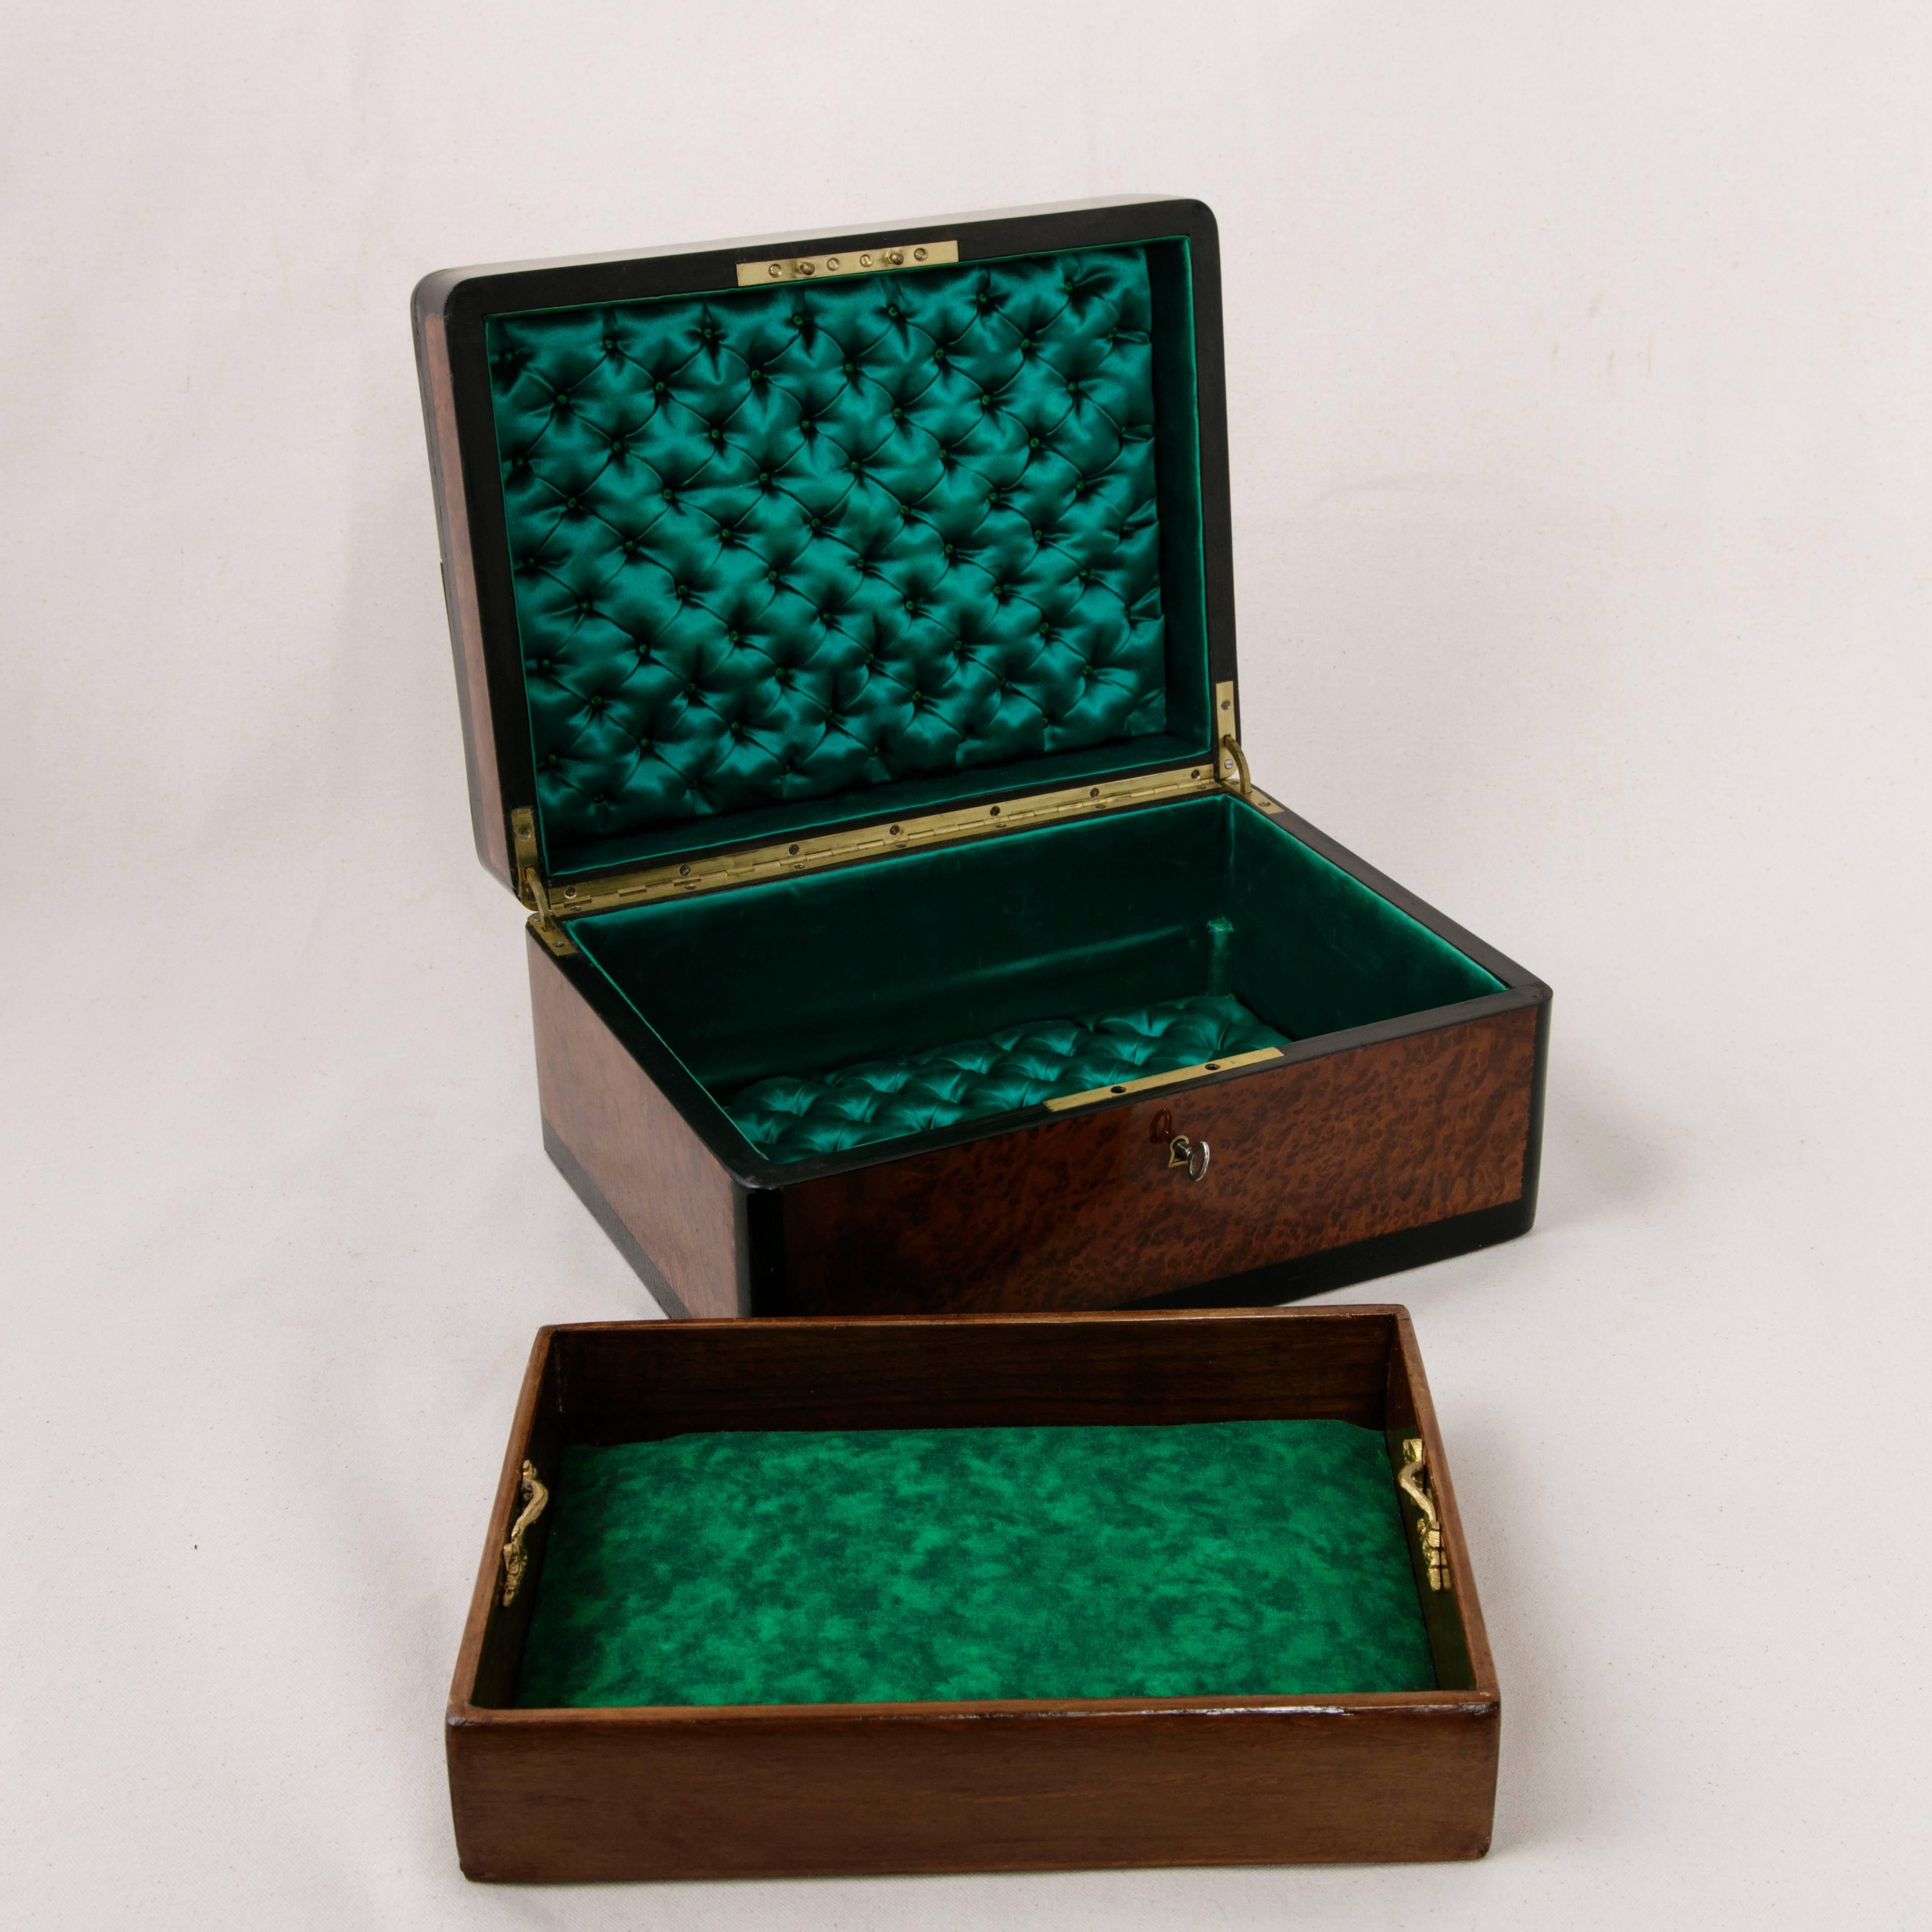 This unusually large decorative marquetry box was created during the reign of Napoleon III in France. A handsome and sleek geometric inlaid design of contrasting bronze, ivory and black lacquer surrounds its thuya wood exterior. The interior is